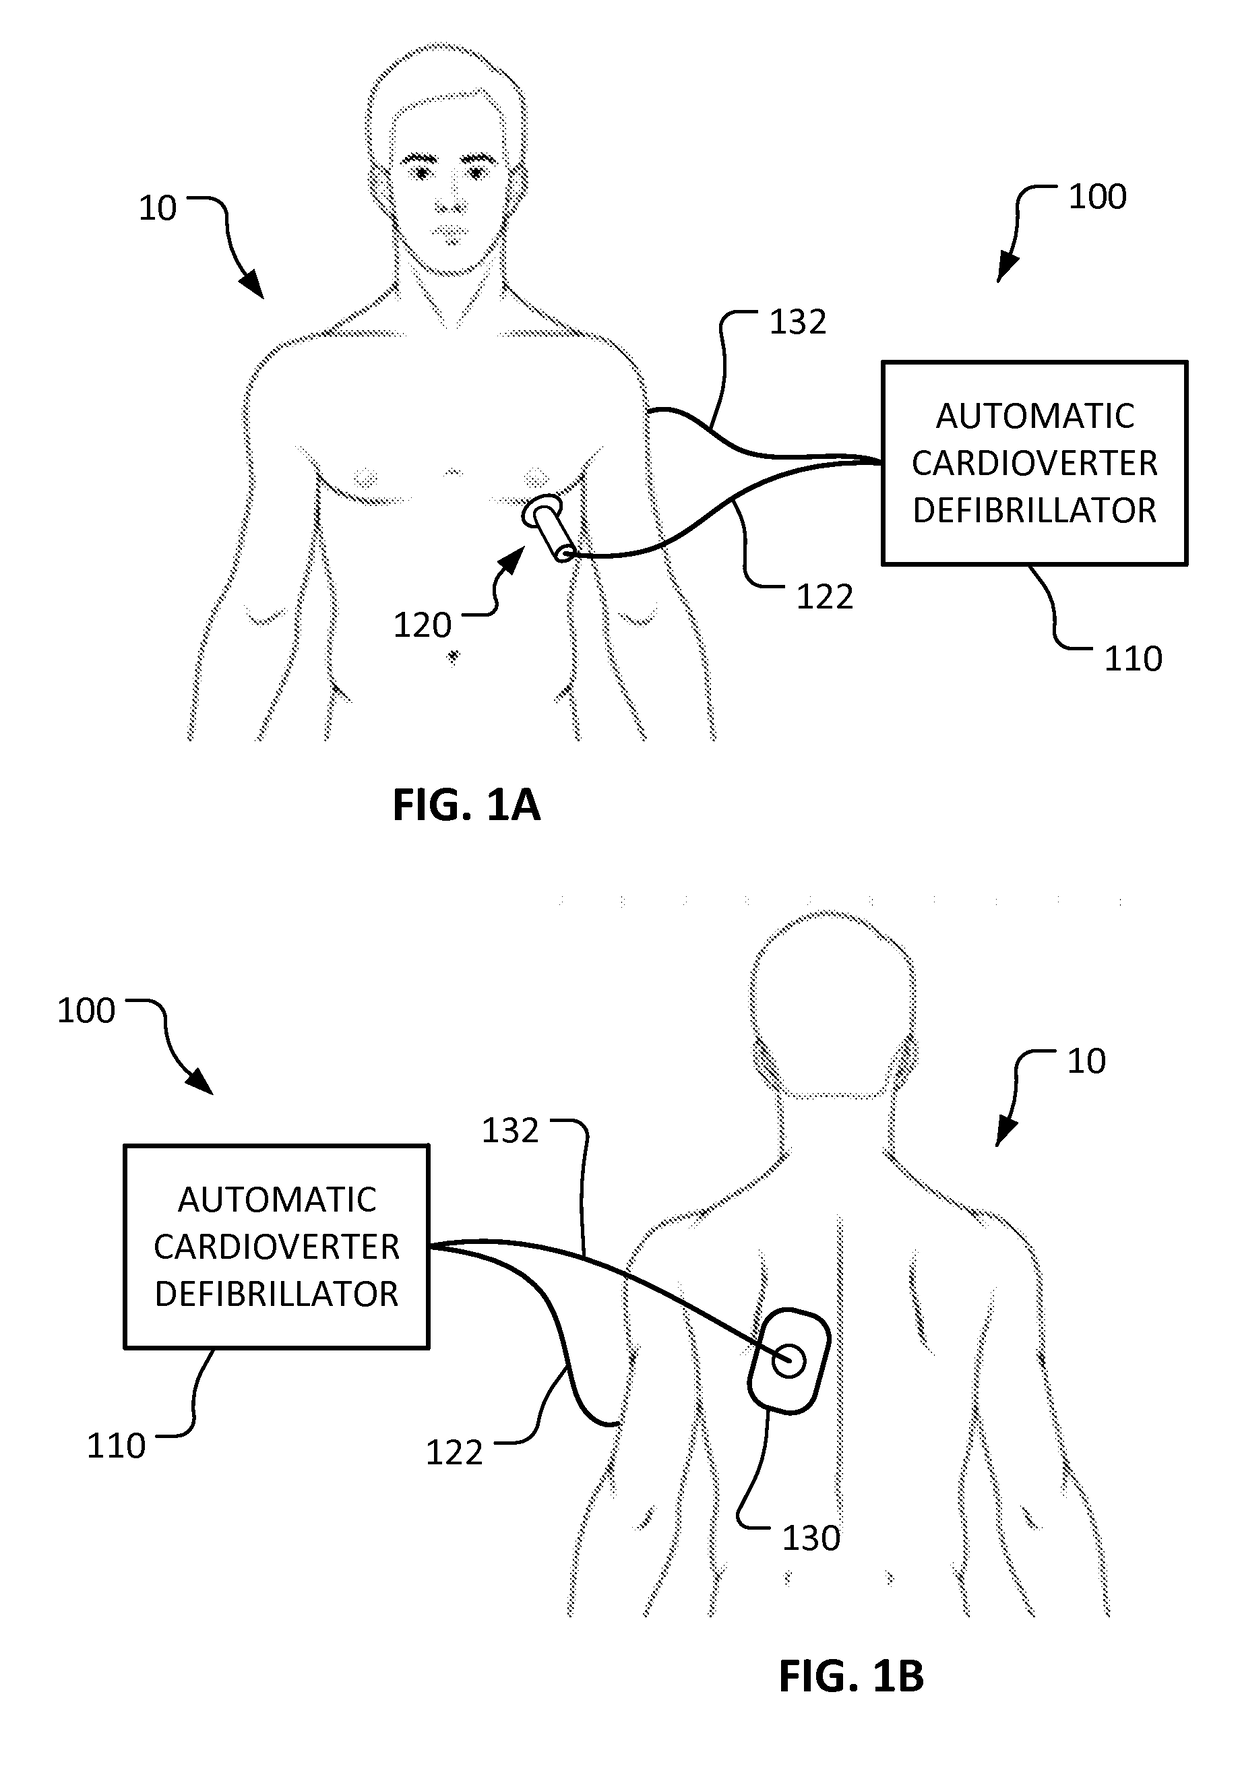 Percutaneous temporary epicardial pacemaker system